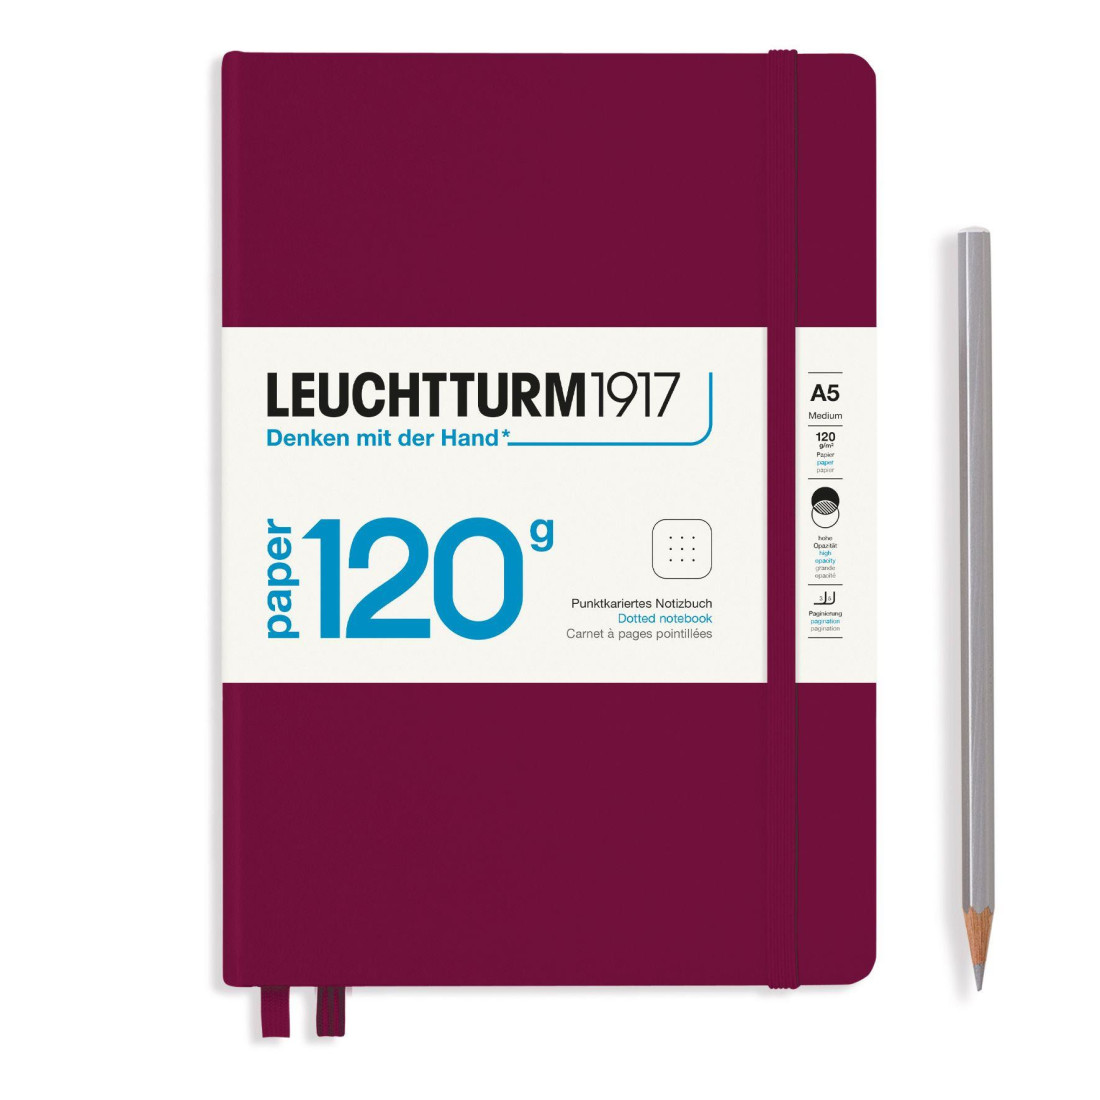 Leuchtturm 1917 Notebook A5 Edition 120g Port Red Dotted Hard Cover